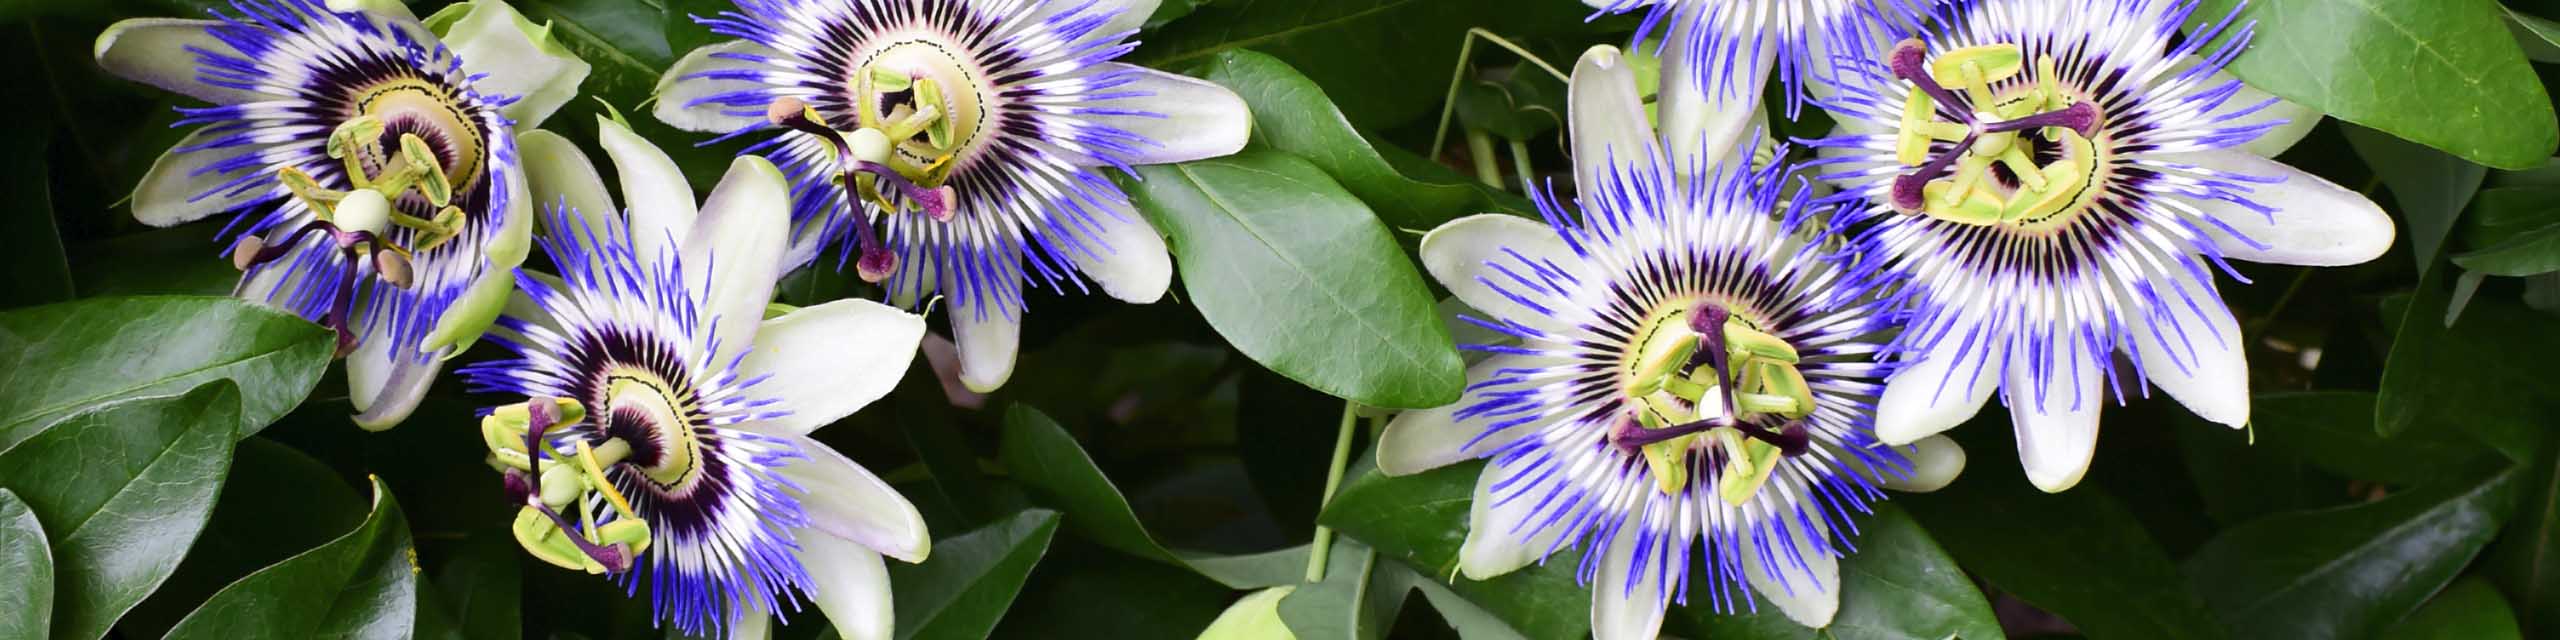 Purple, white, and yellow passionflowers blooming on the vine.